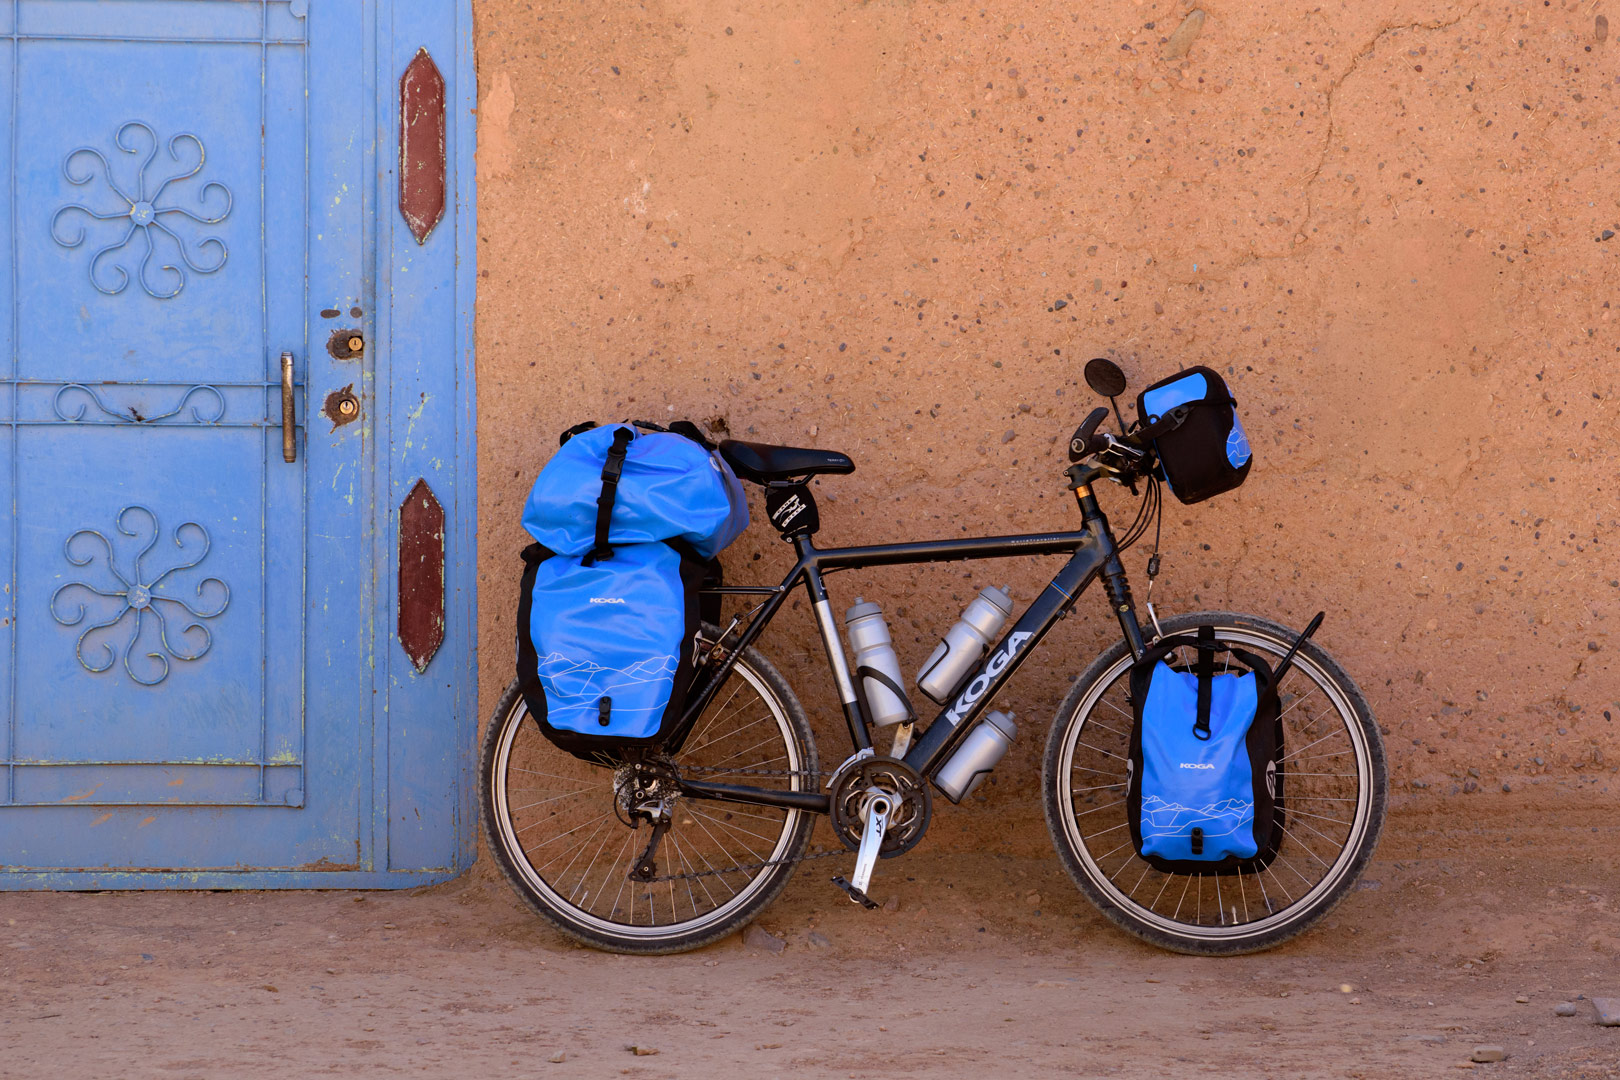 A touring bicycle in Morocco